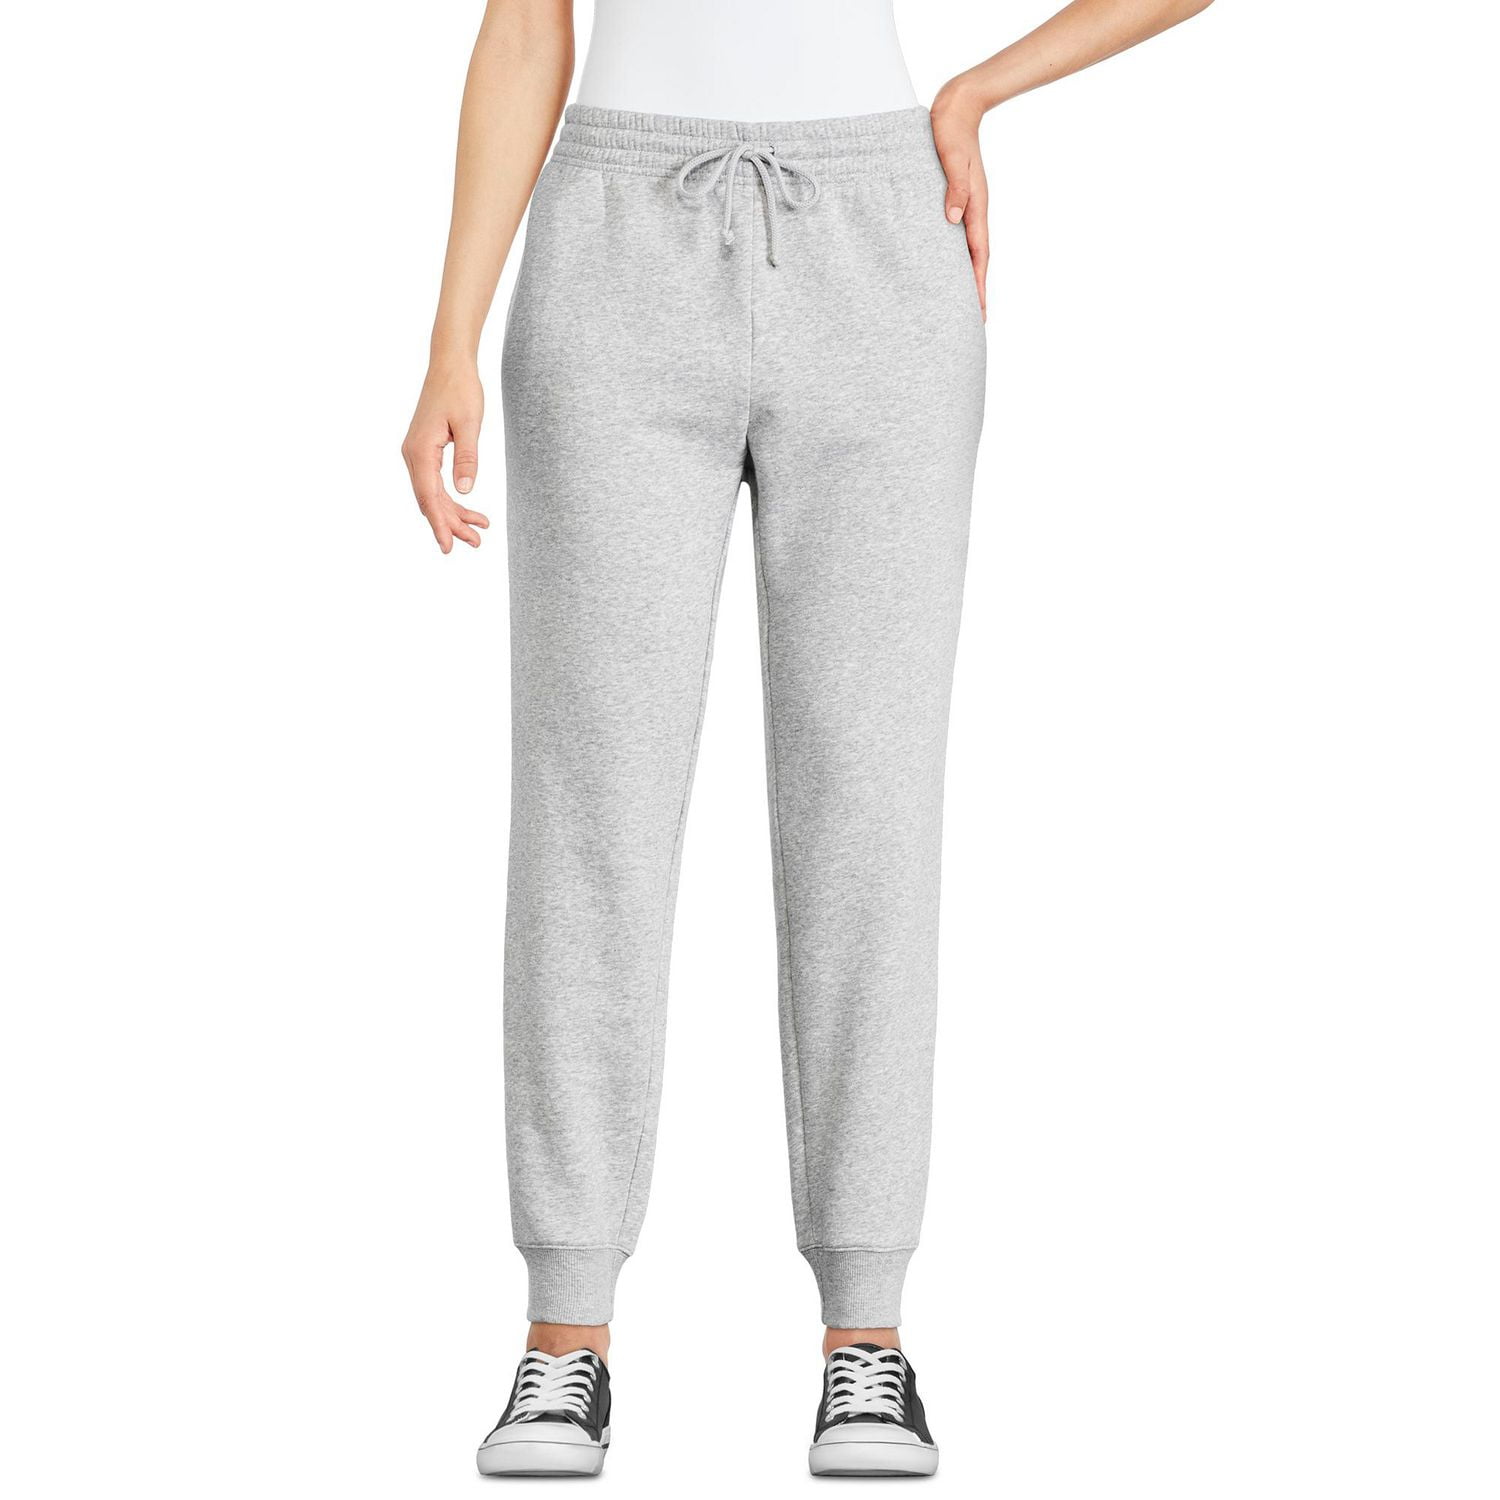 UNDER ARMOUR Squad Women's Athletic Ankle Zip Track Pants Grey Size 2XL NEW  $60